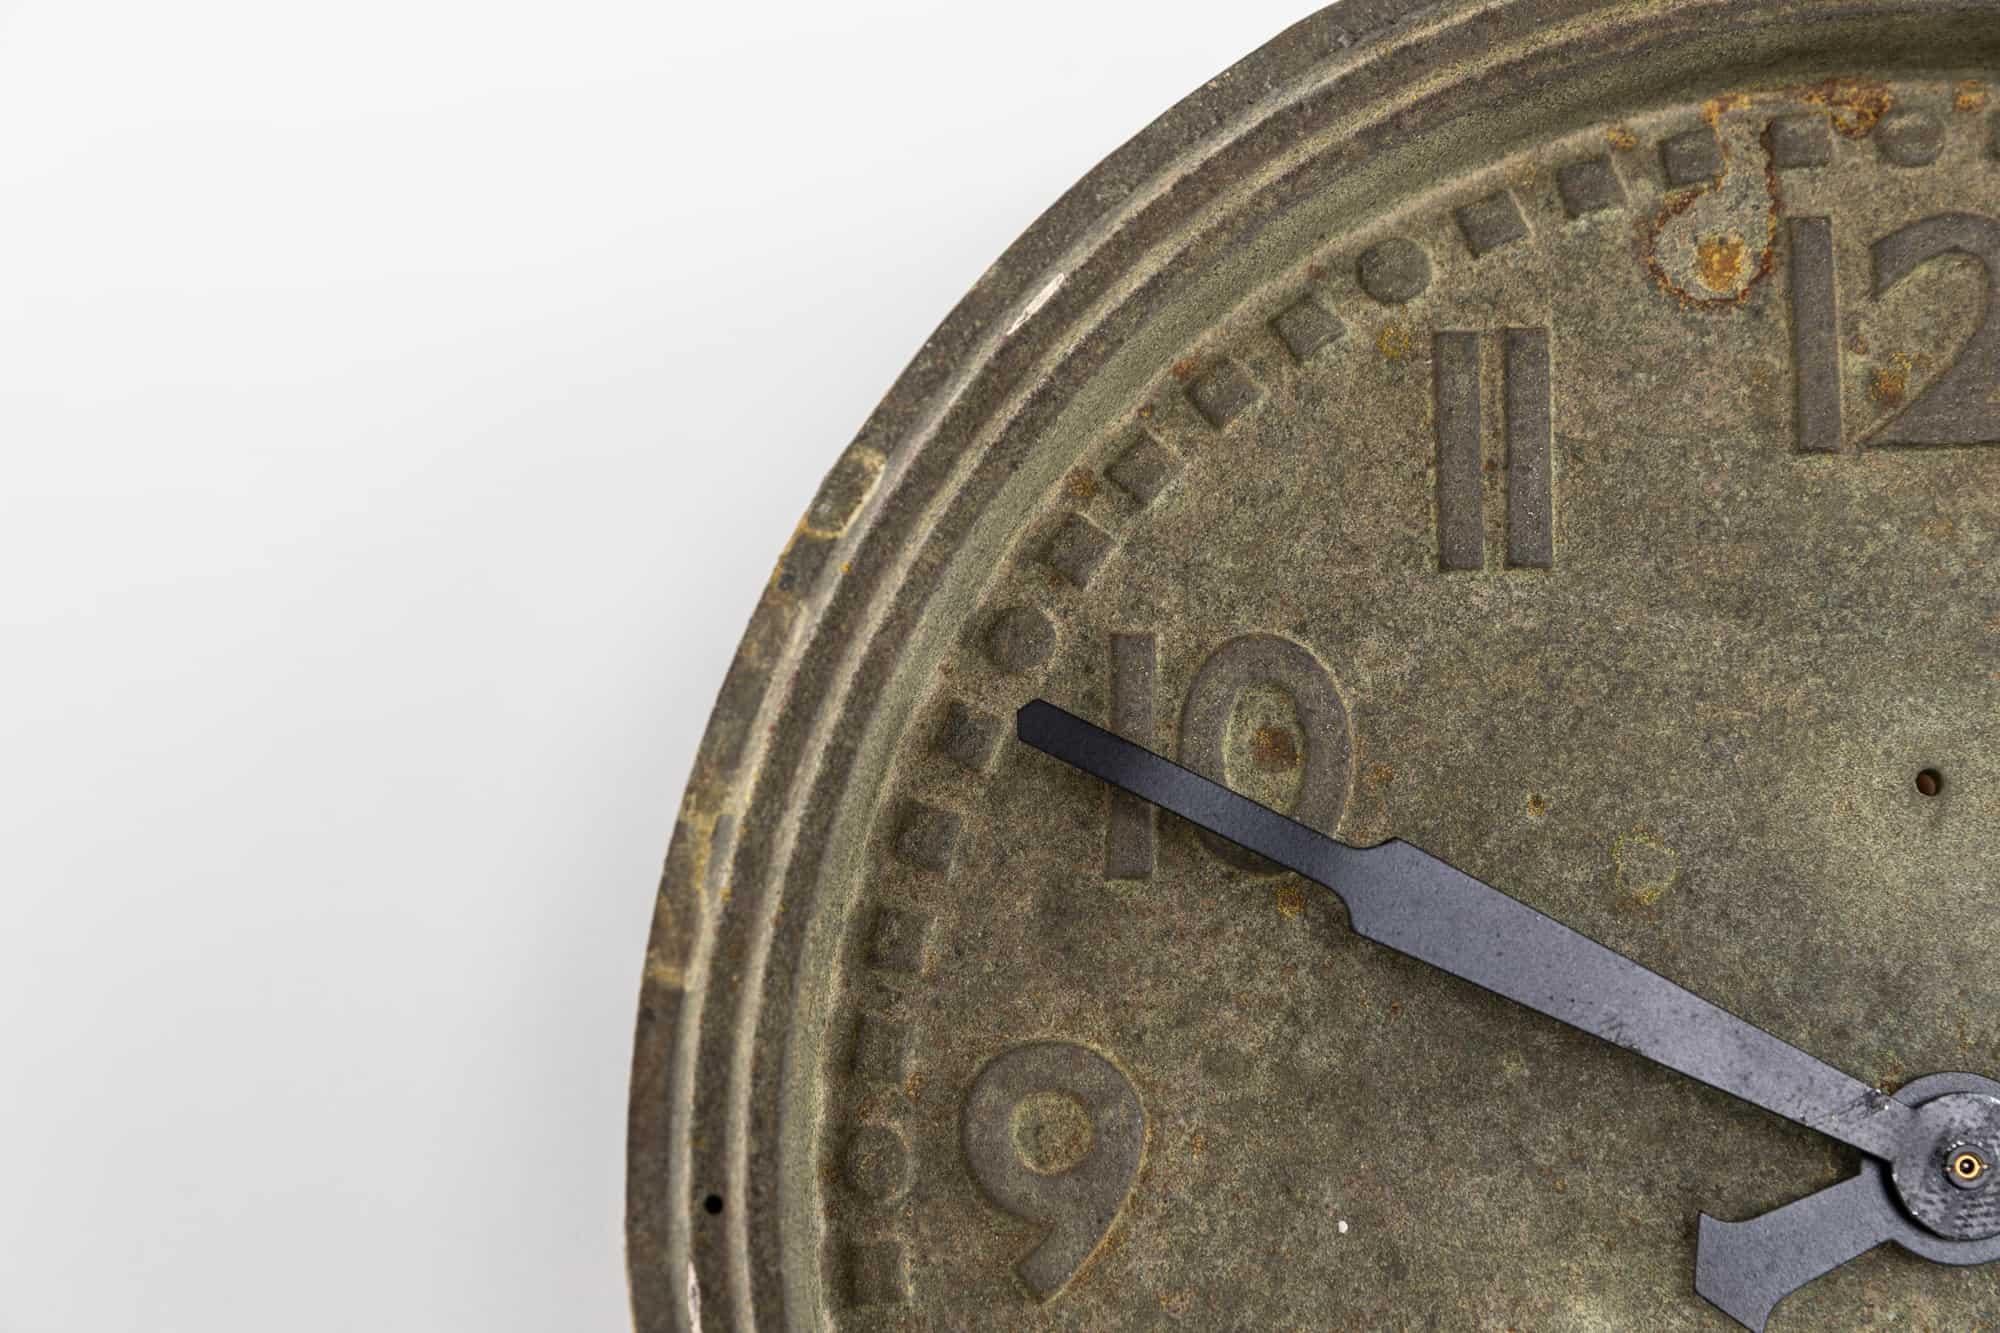 

Beautiful example of a cast iron factory wall clock made in England by Smiths. c.1930

Lesser seen than the iconic cast Gents of Leicester clock - made from a single piece of cast iron with debossed numerals and chapters. The whole had developed a